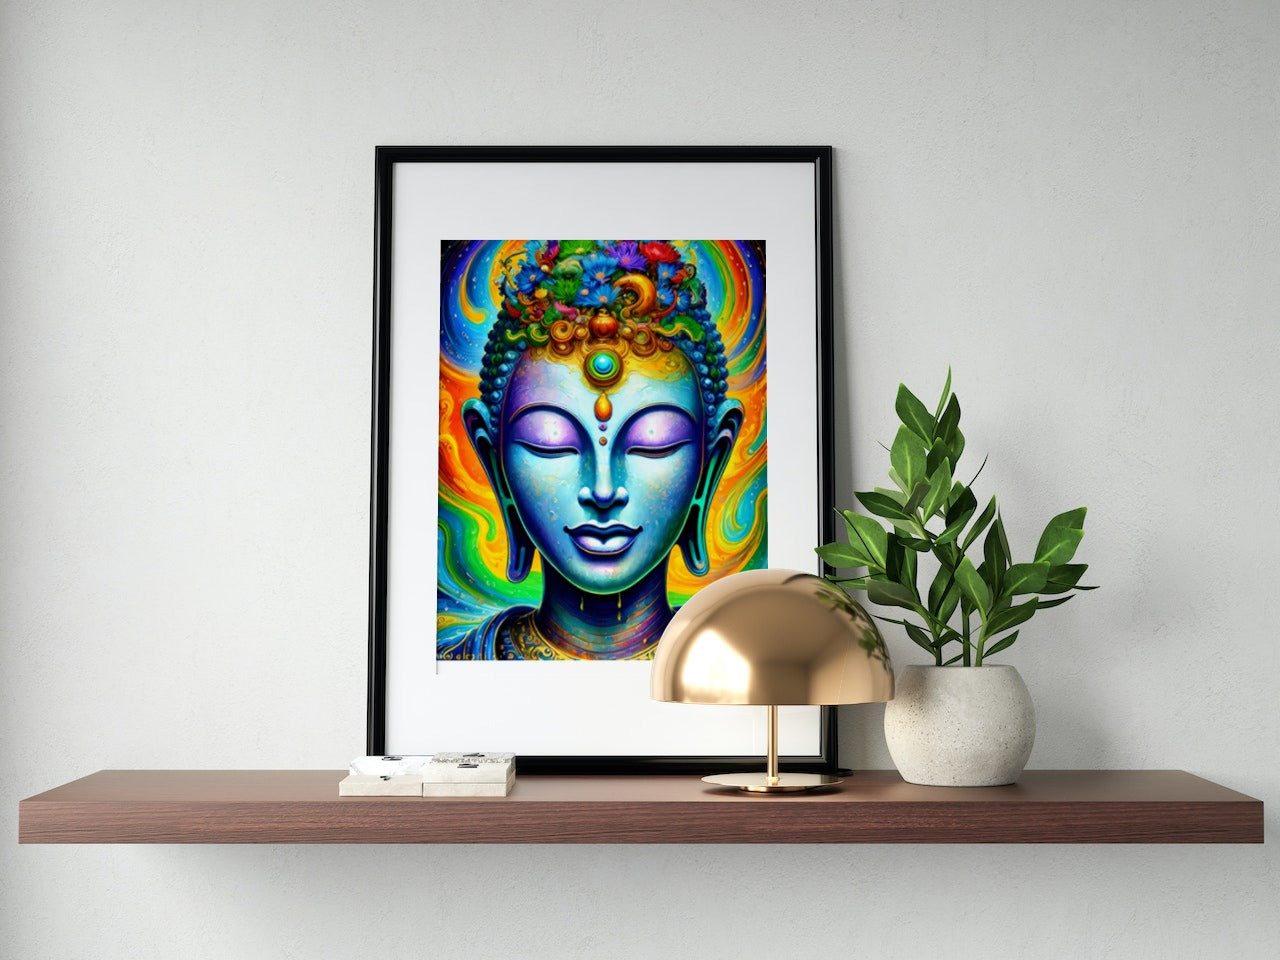 A vibrant, framed portrait painting of a Buddha face, adorned with various colors, placed on shelf of a well-lit room. The contemporary artwork adds a touch of serenity and spirituality to the room's decor.